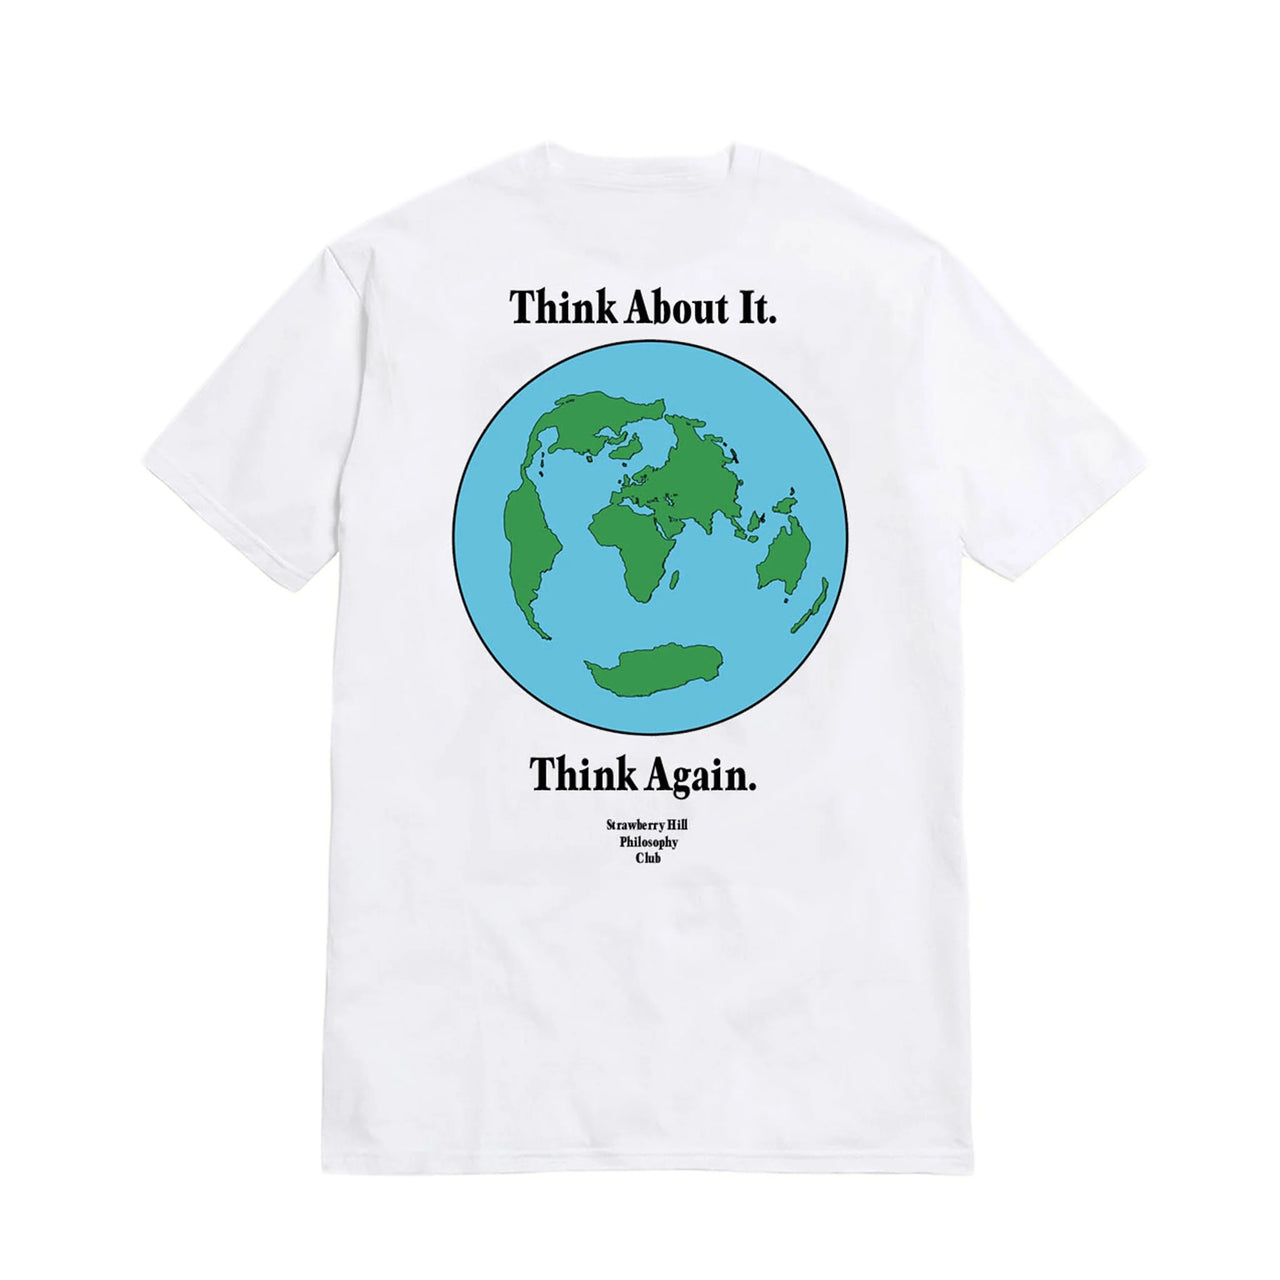 STRAWBERRY HILL PHILOSOPHY CLUB - THINK ABOUT IT T-SHIRT - WHITE